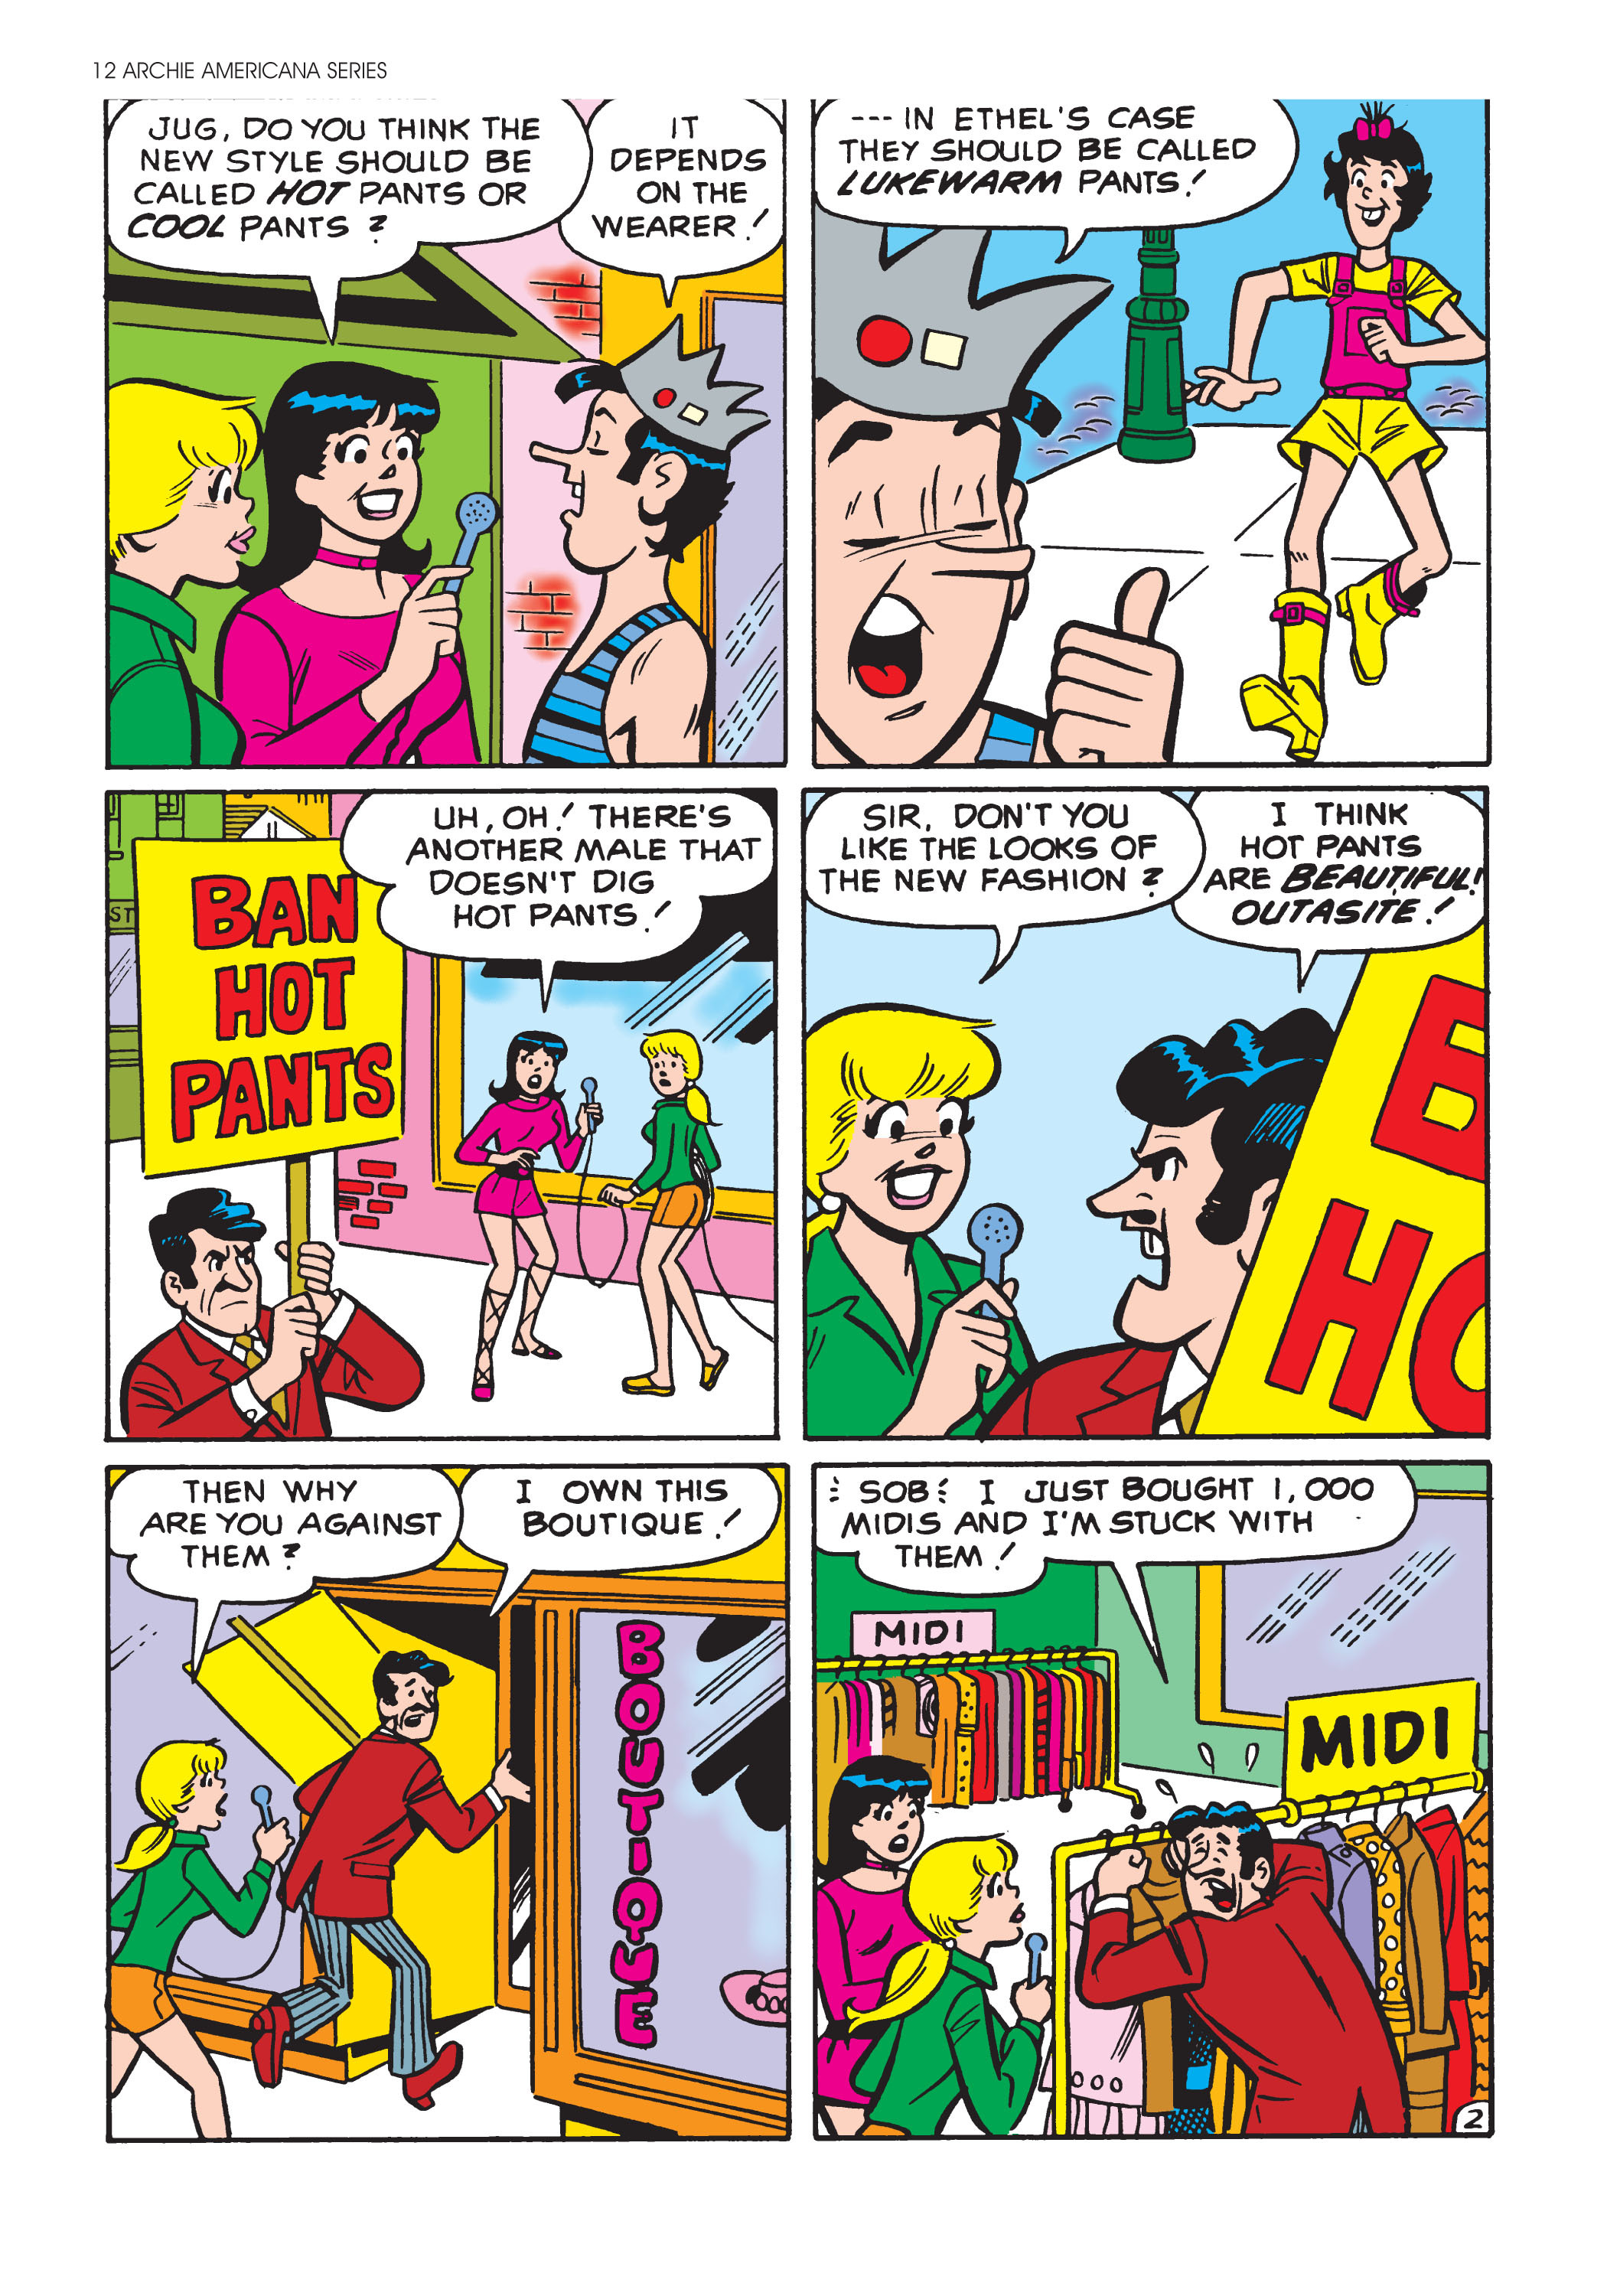 Read online Archie Americana Series comic -  Issue # TPB 4 - 14